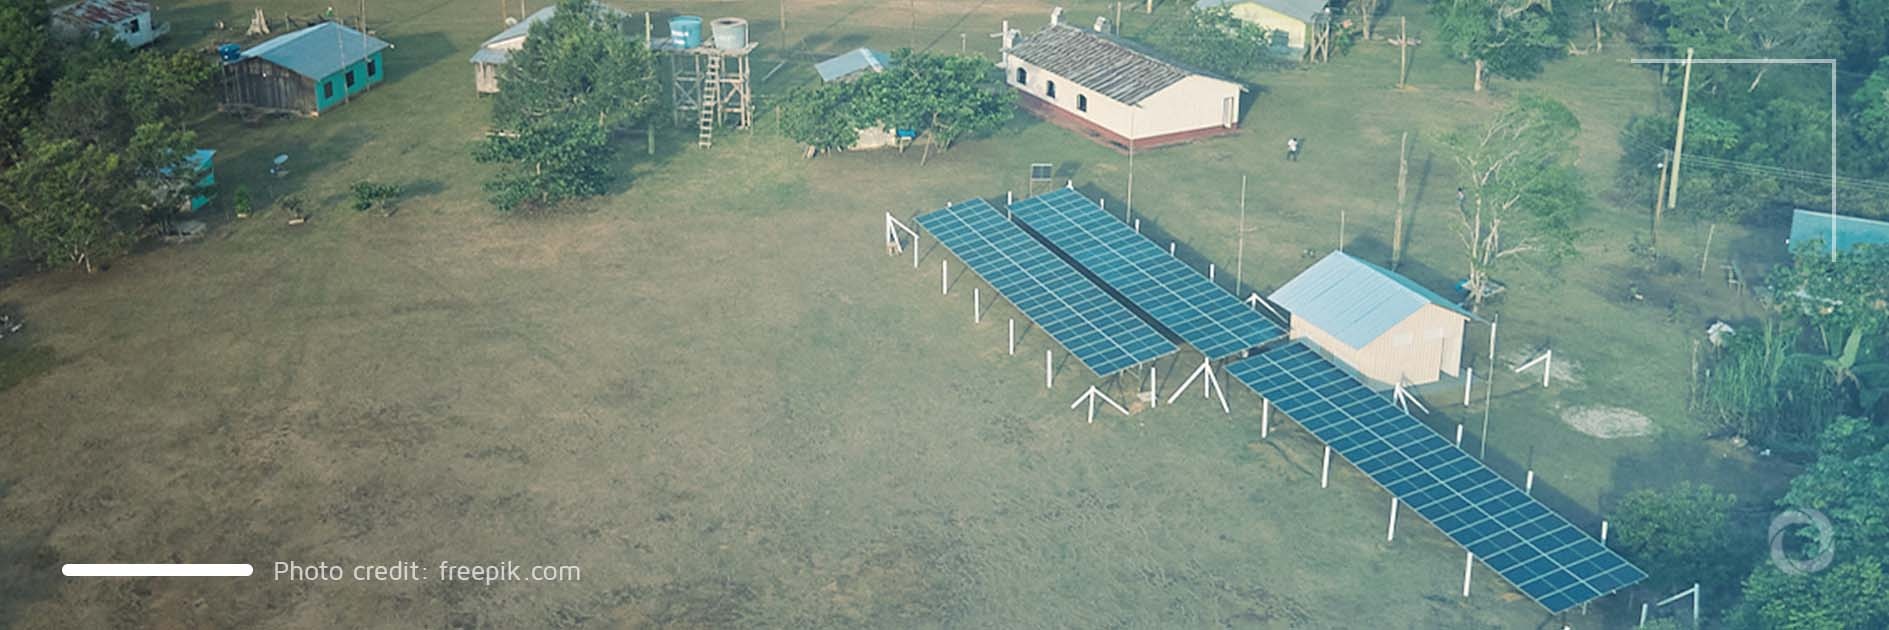 Solar energy opens up opportunities for remote Amazon communities